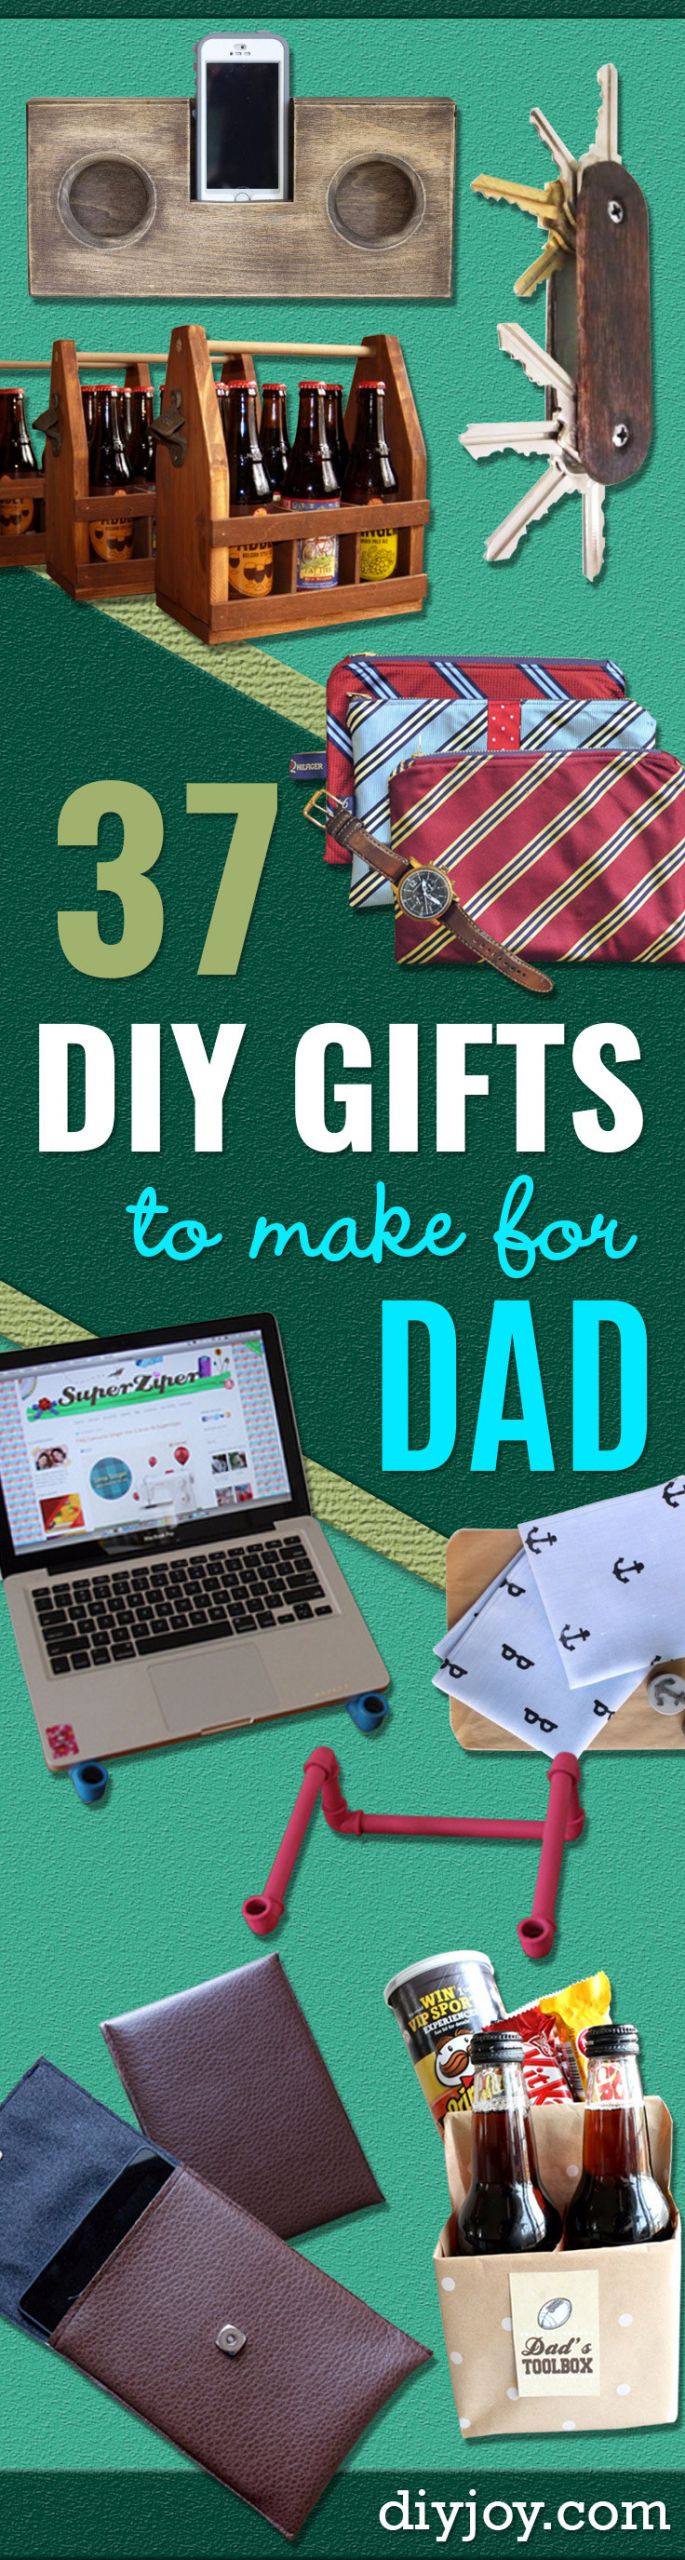 DIY Christmas Presents For Dad
 37 Awesome DIY Gifts to Make for Dad